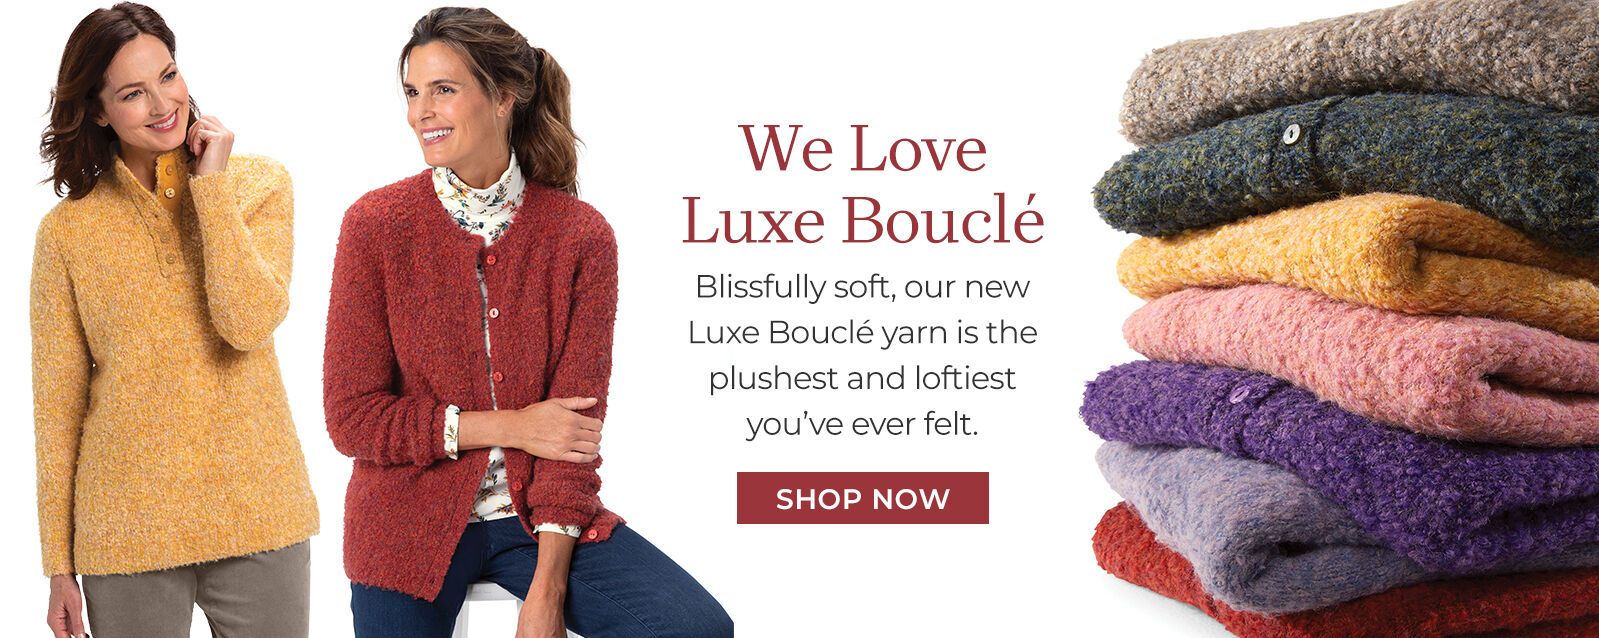 we love luxe boucle blissfully soft, our new Luxe Boucle yarn is the plushest and loftiest you've ever felt. shop now